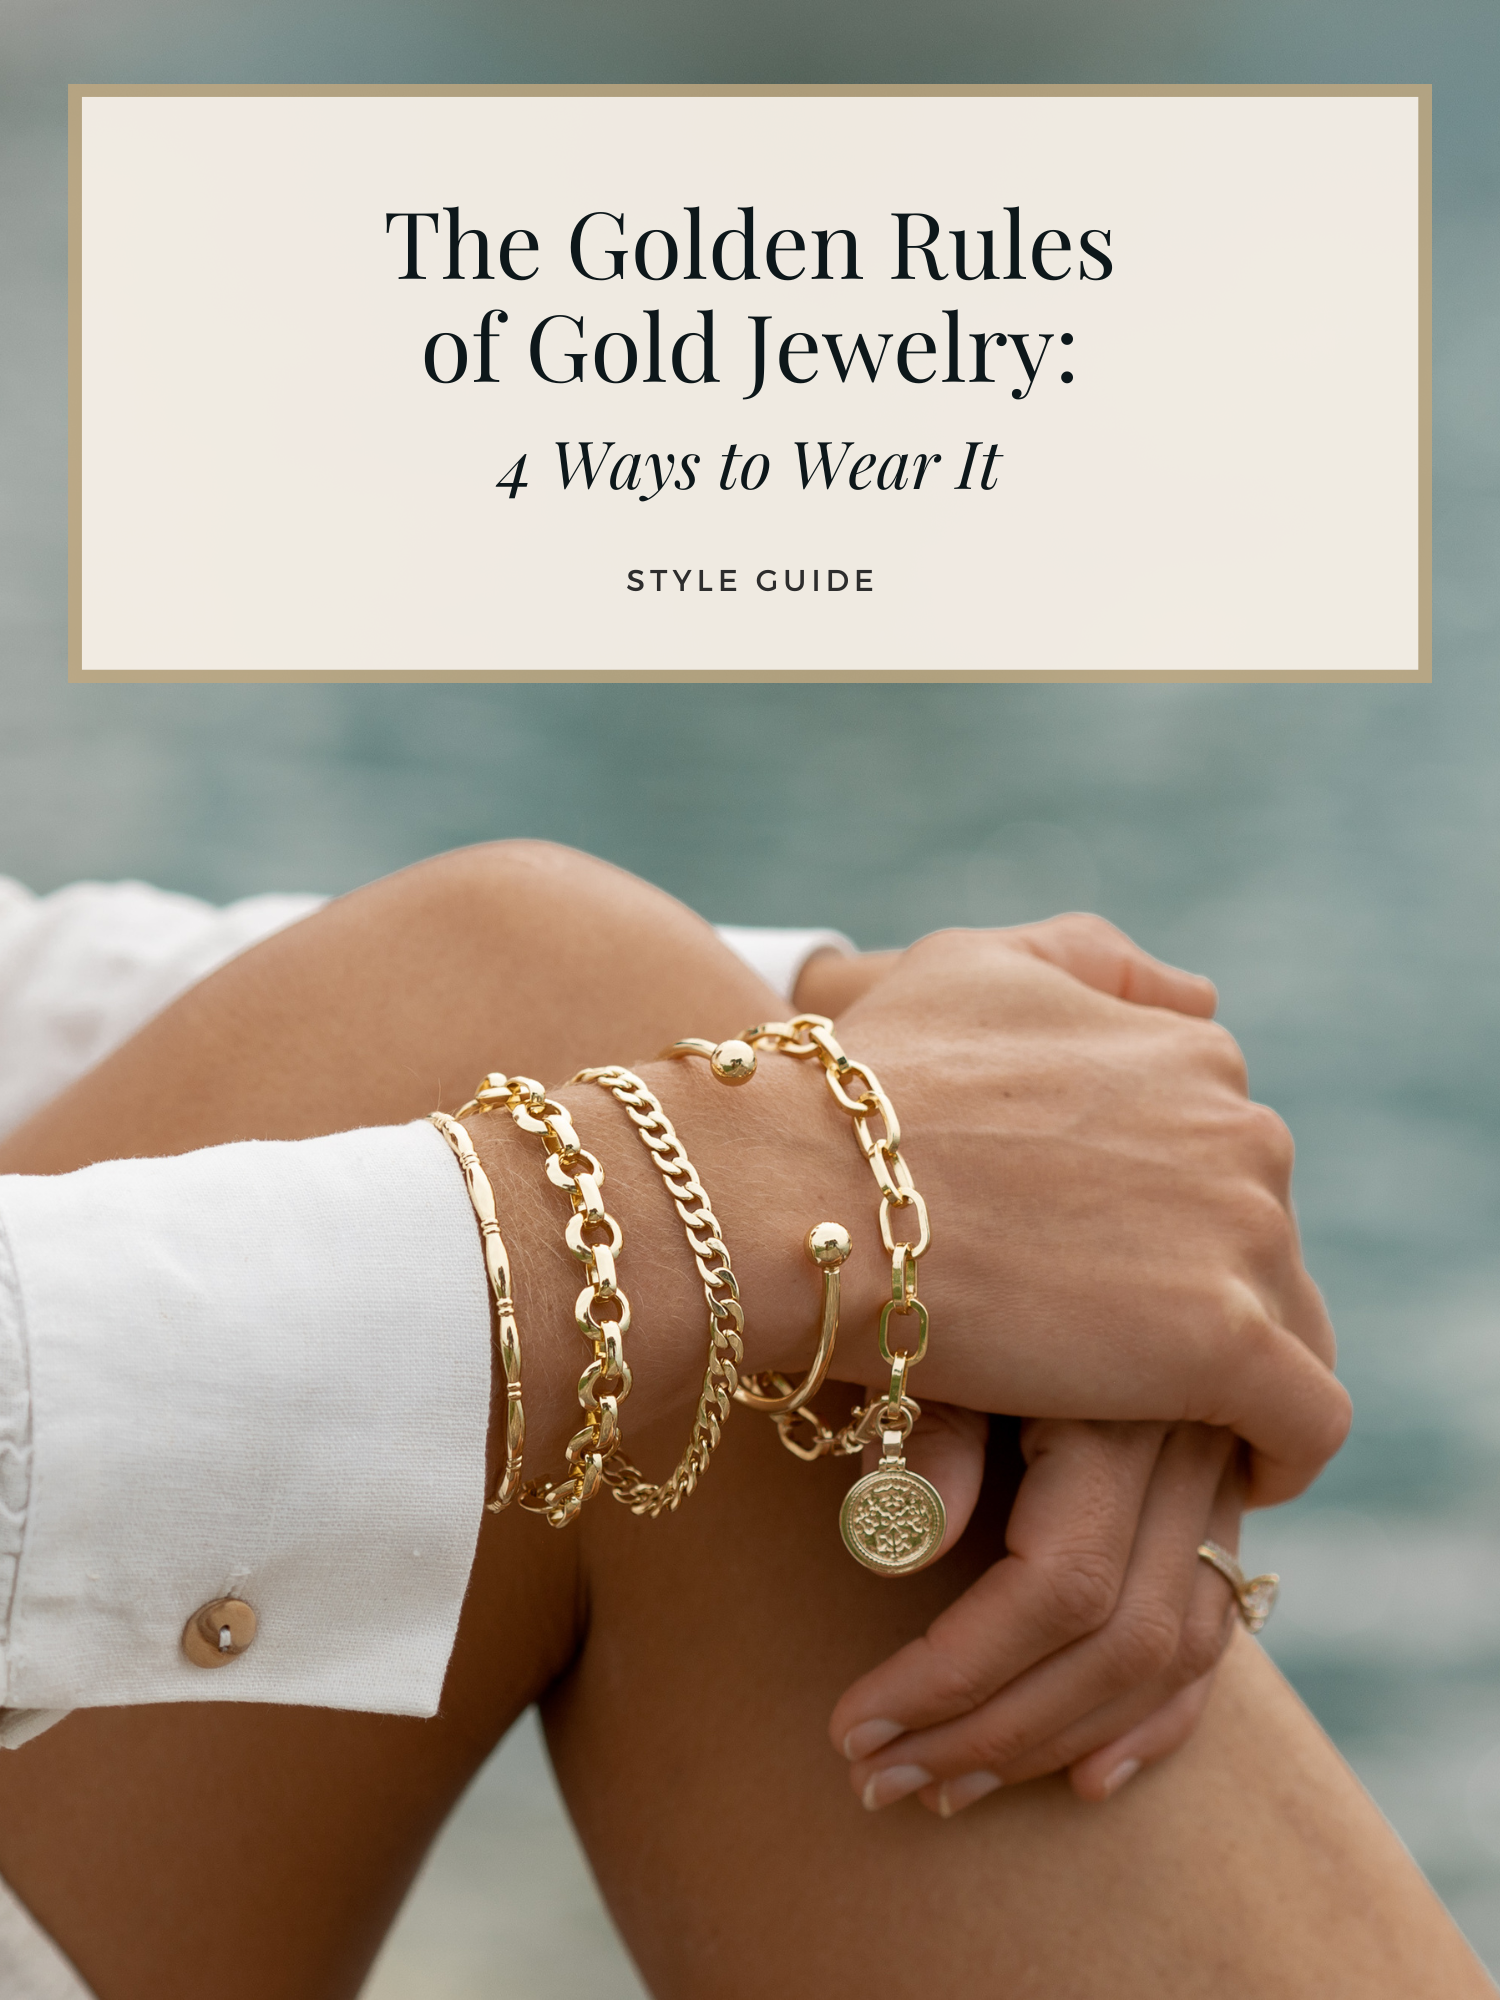 The Golden Rules of Gold Jewelry: 4 Ways To Wear It